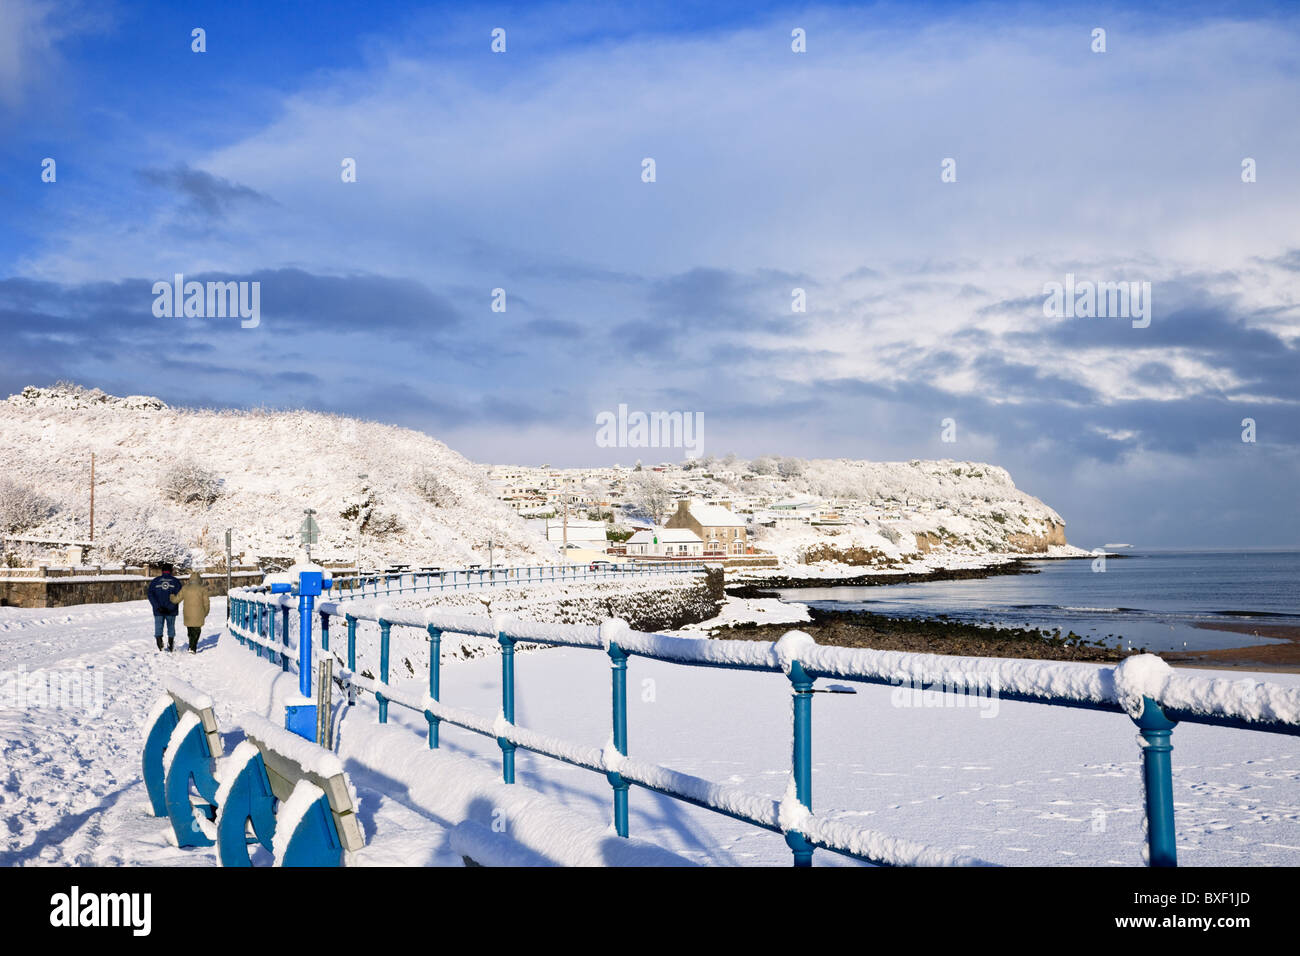 Snow on the seafront railings and beach on Welsh coast in winter 2010. Benllech, Isle of Anglesey, Wales, UK, Britain Stock Photo